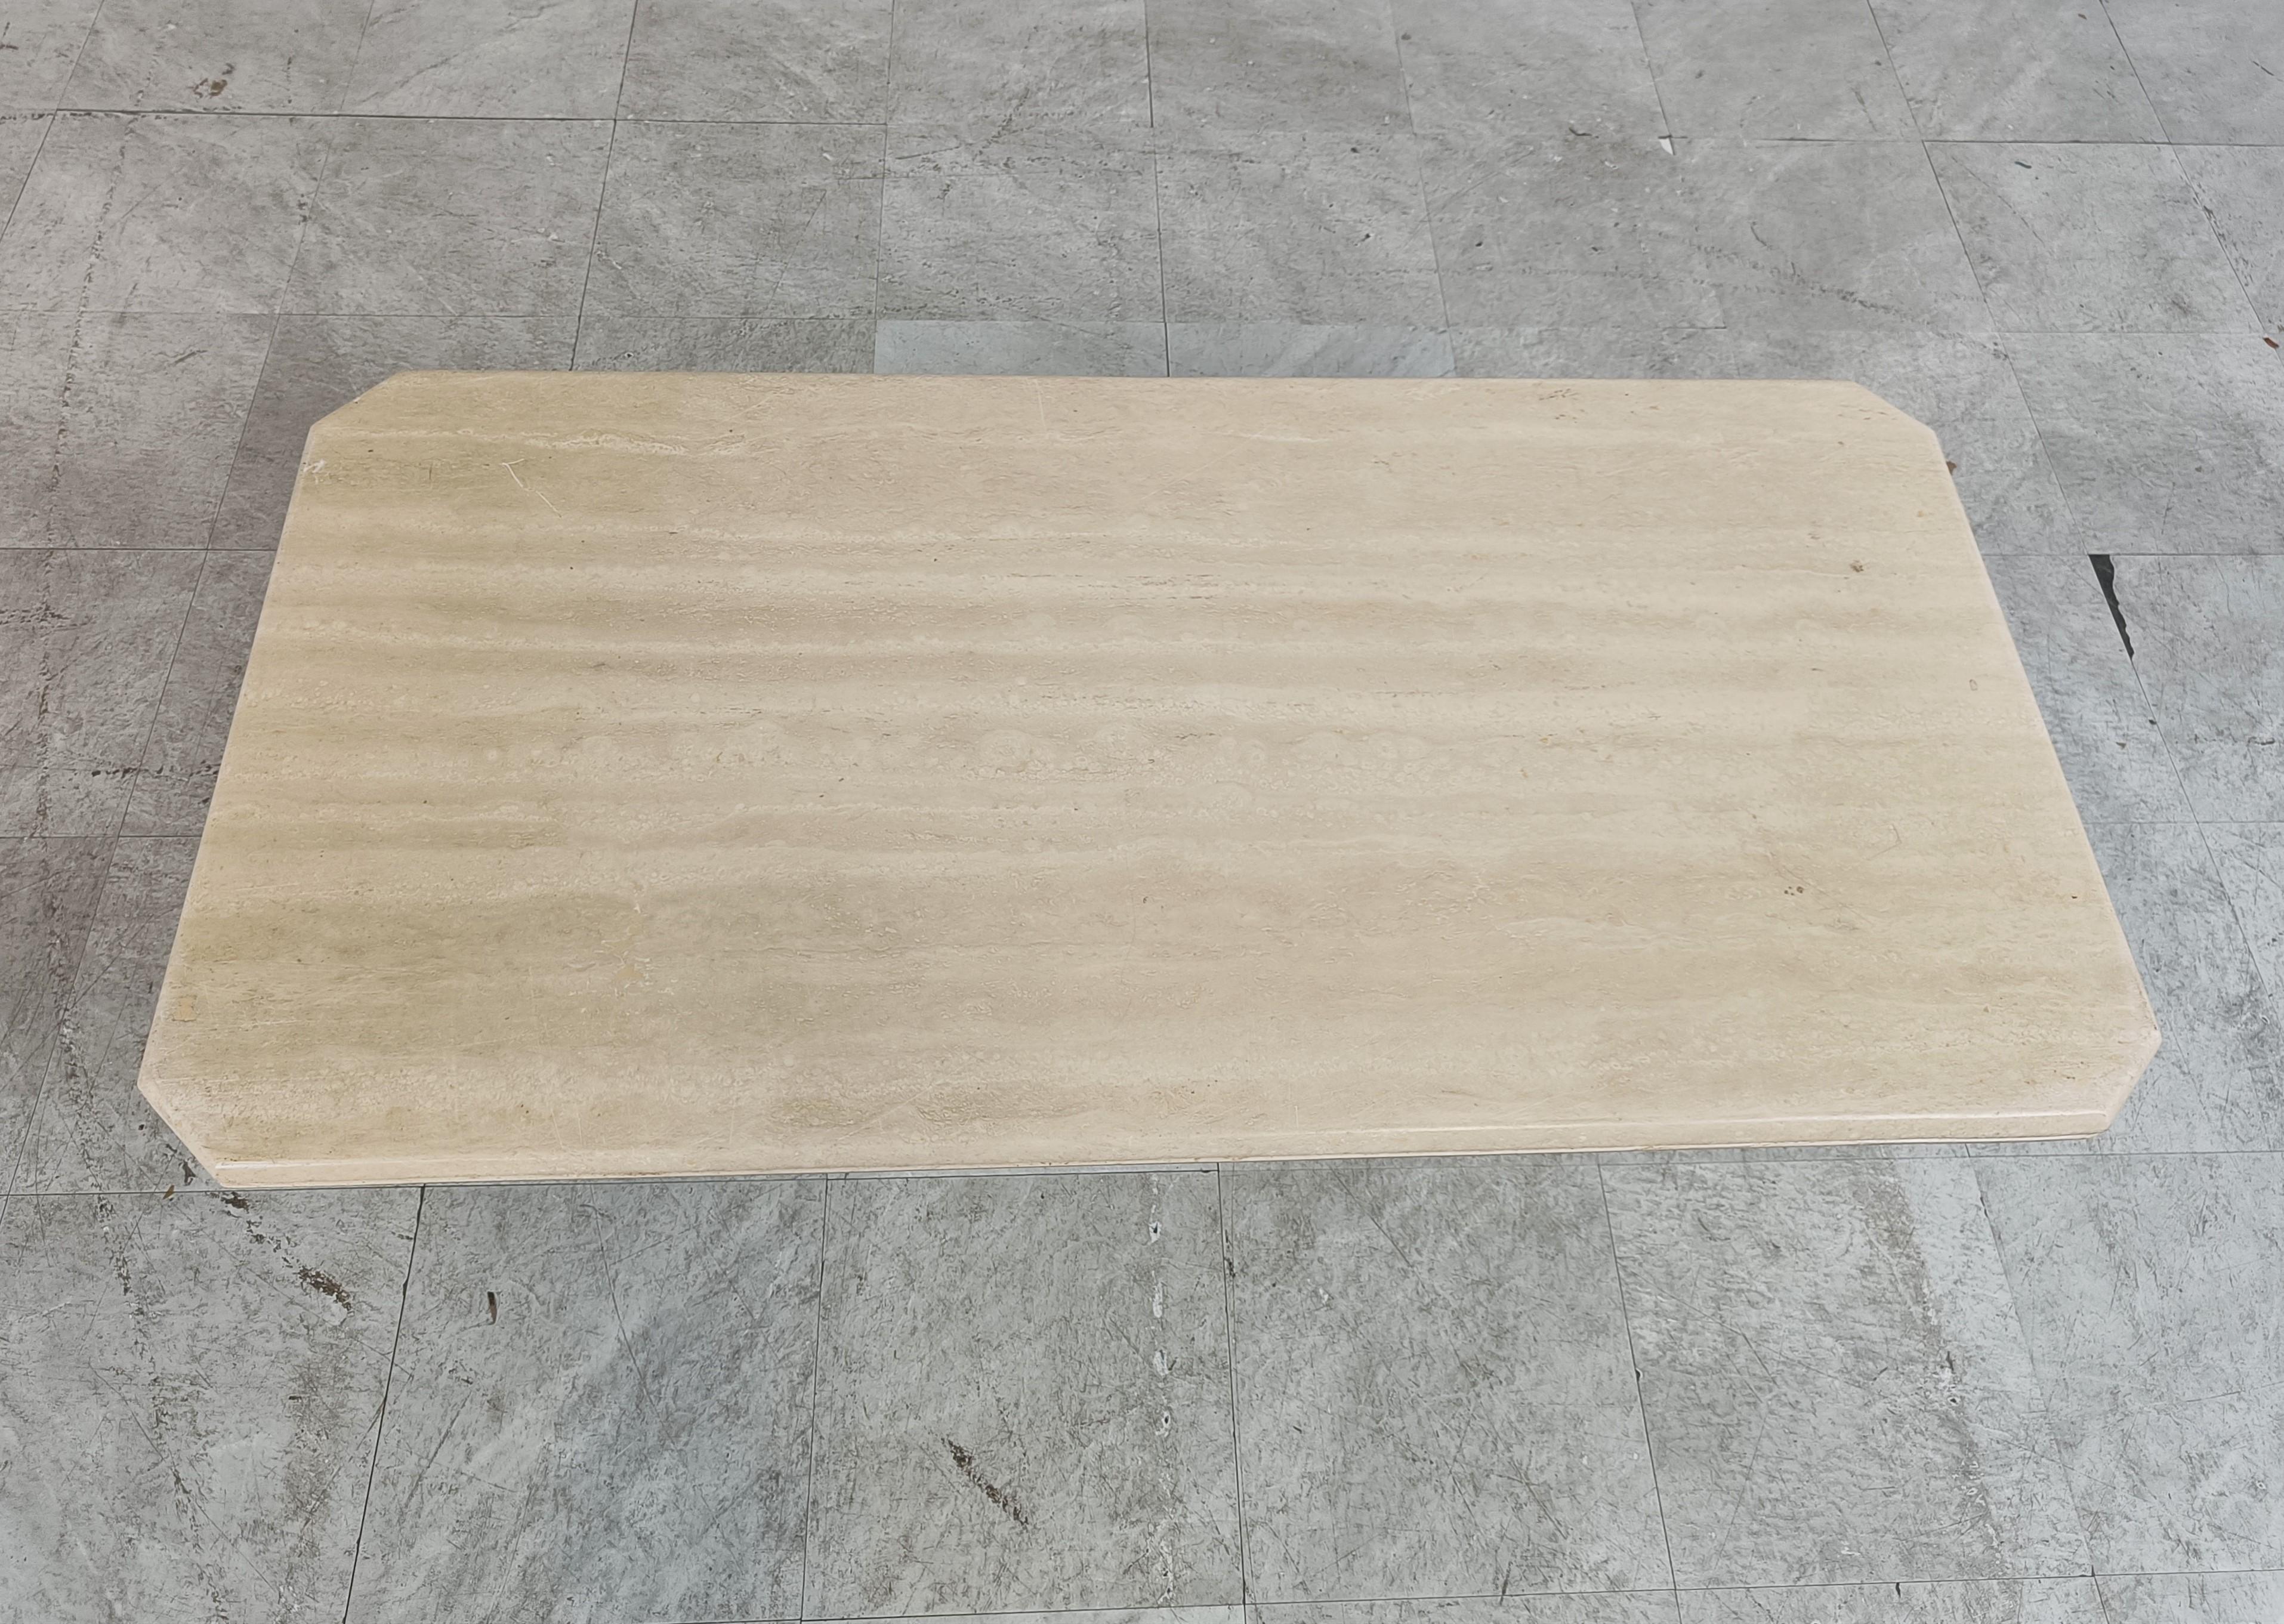 Vintage travertine coffee table with a cross shaped base.

Beautiful natural travertine stone.

Good condition with normal age related wear

1970s - Italy

Height: 37cm/14.56